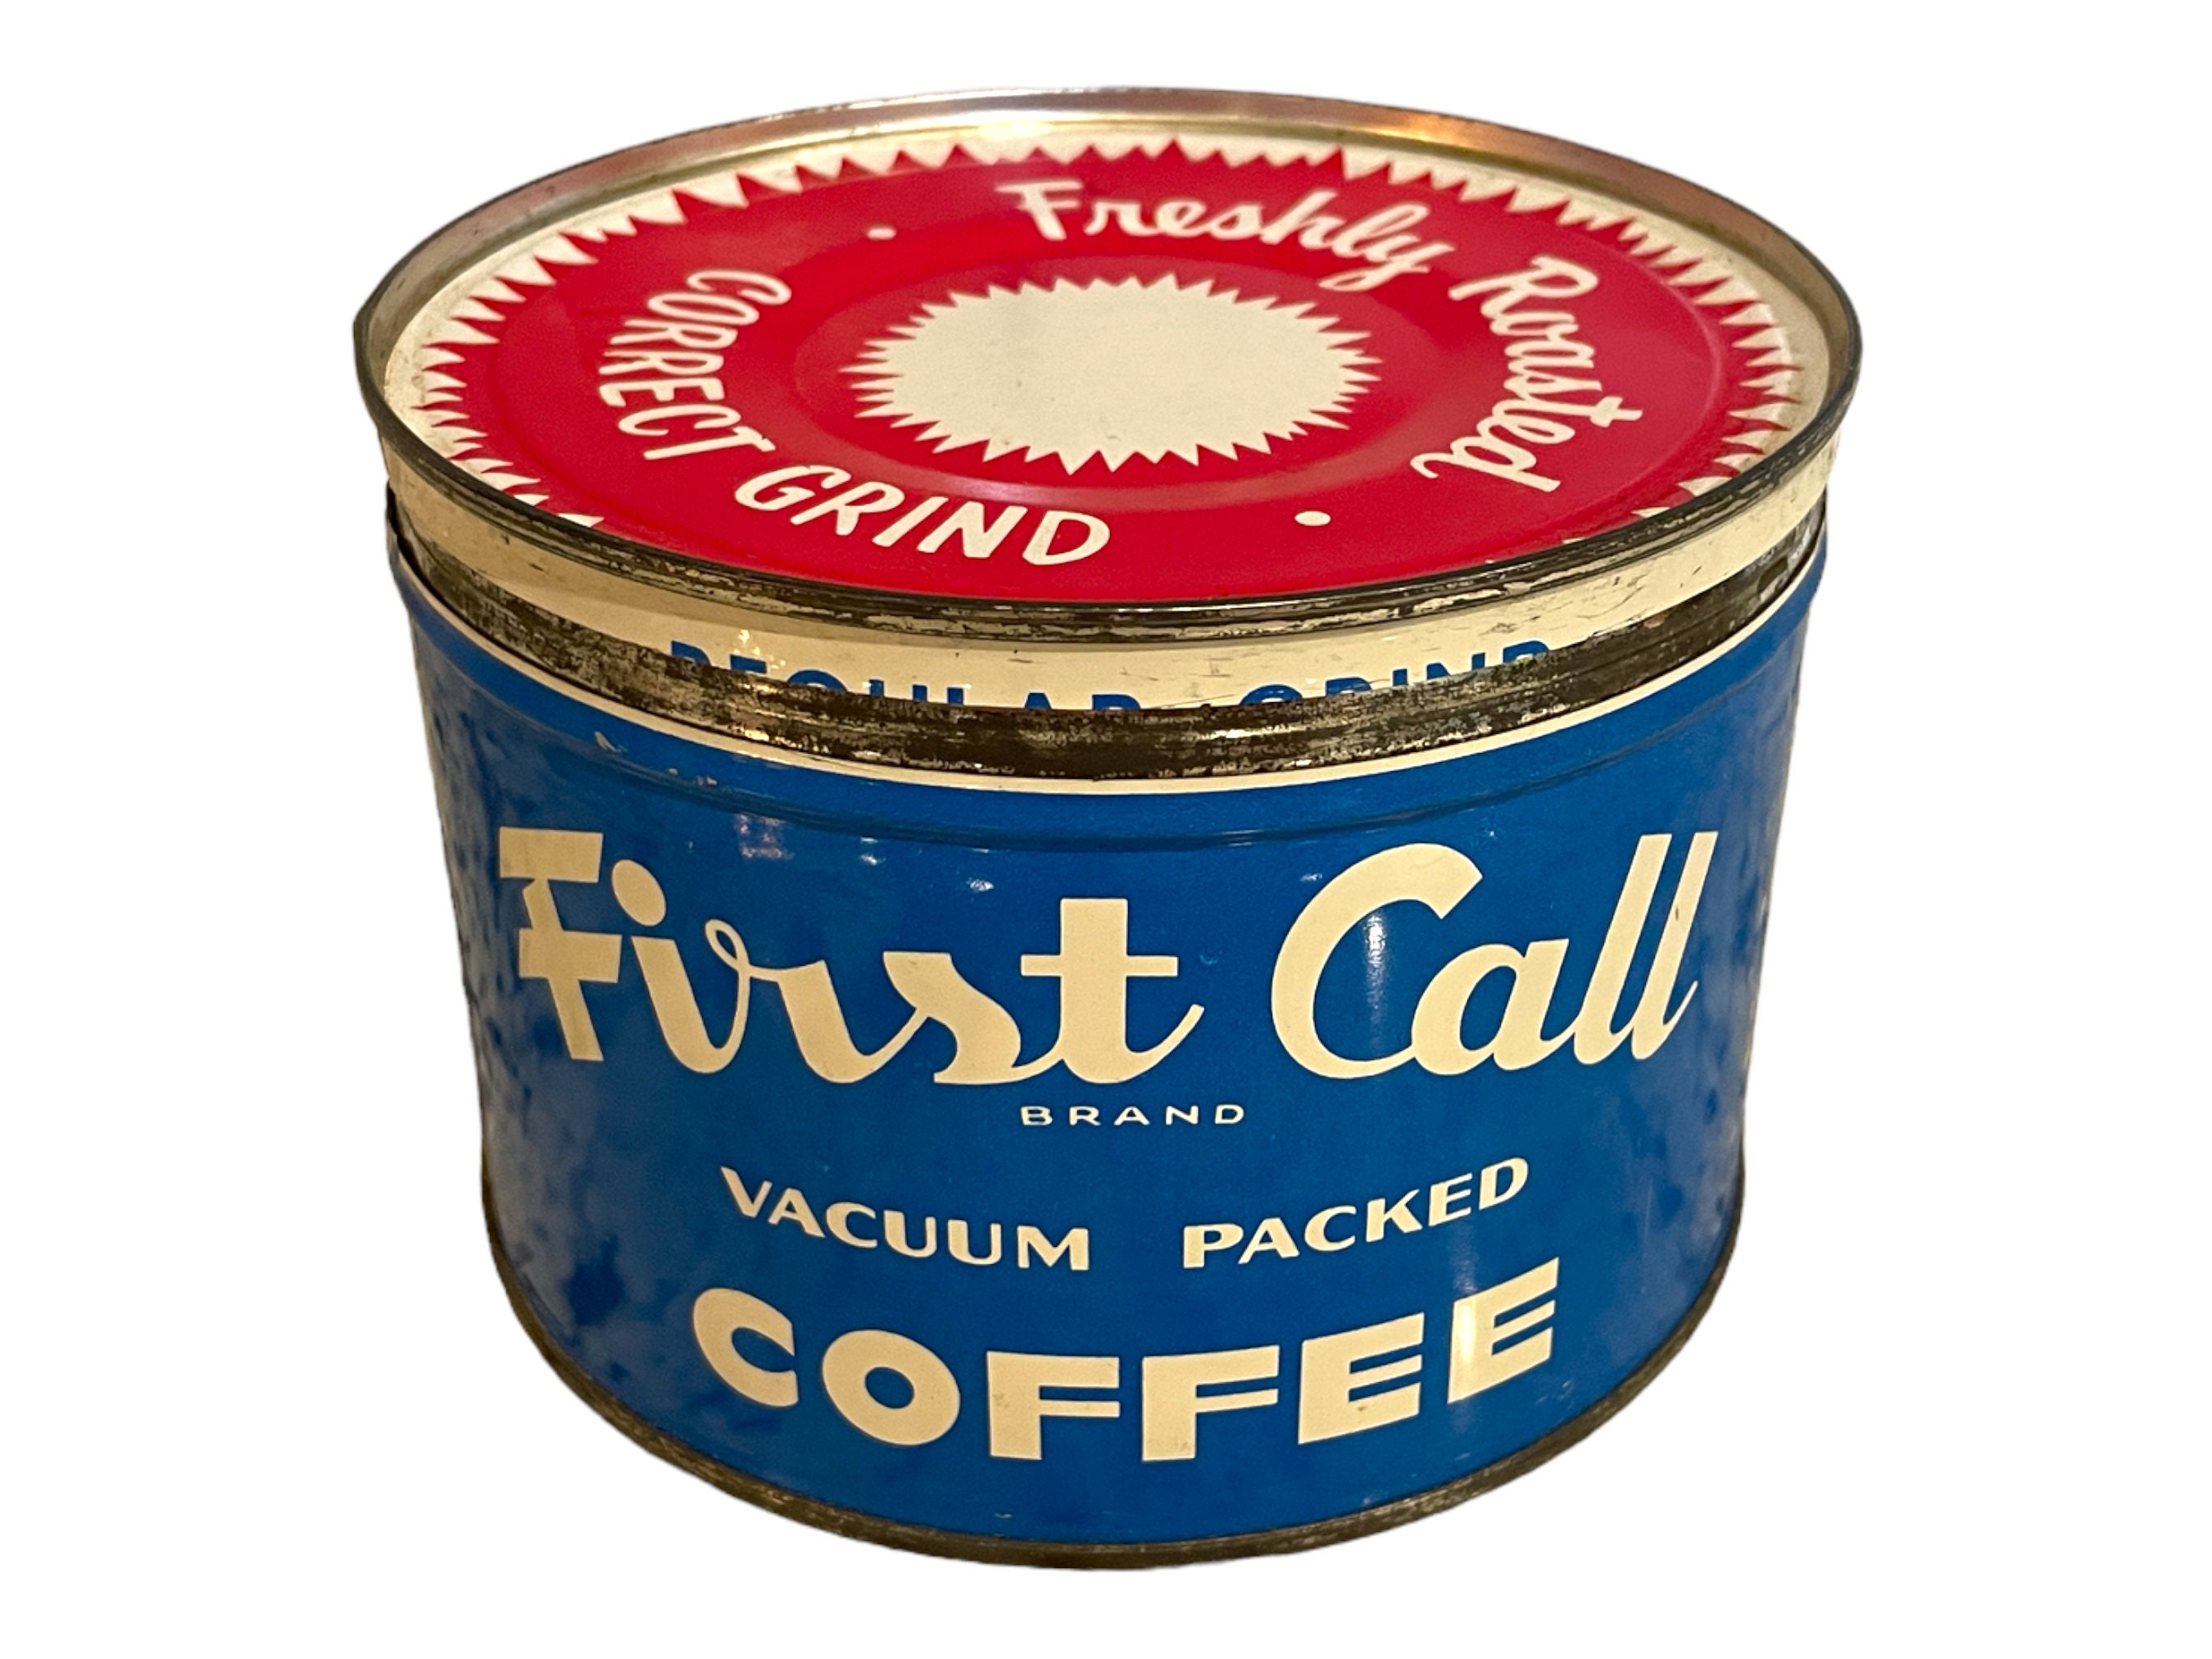 First Call Brand Vacuum Packed Coffee Tin Can Freshly Roasted